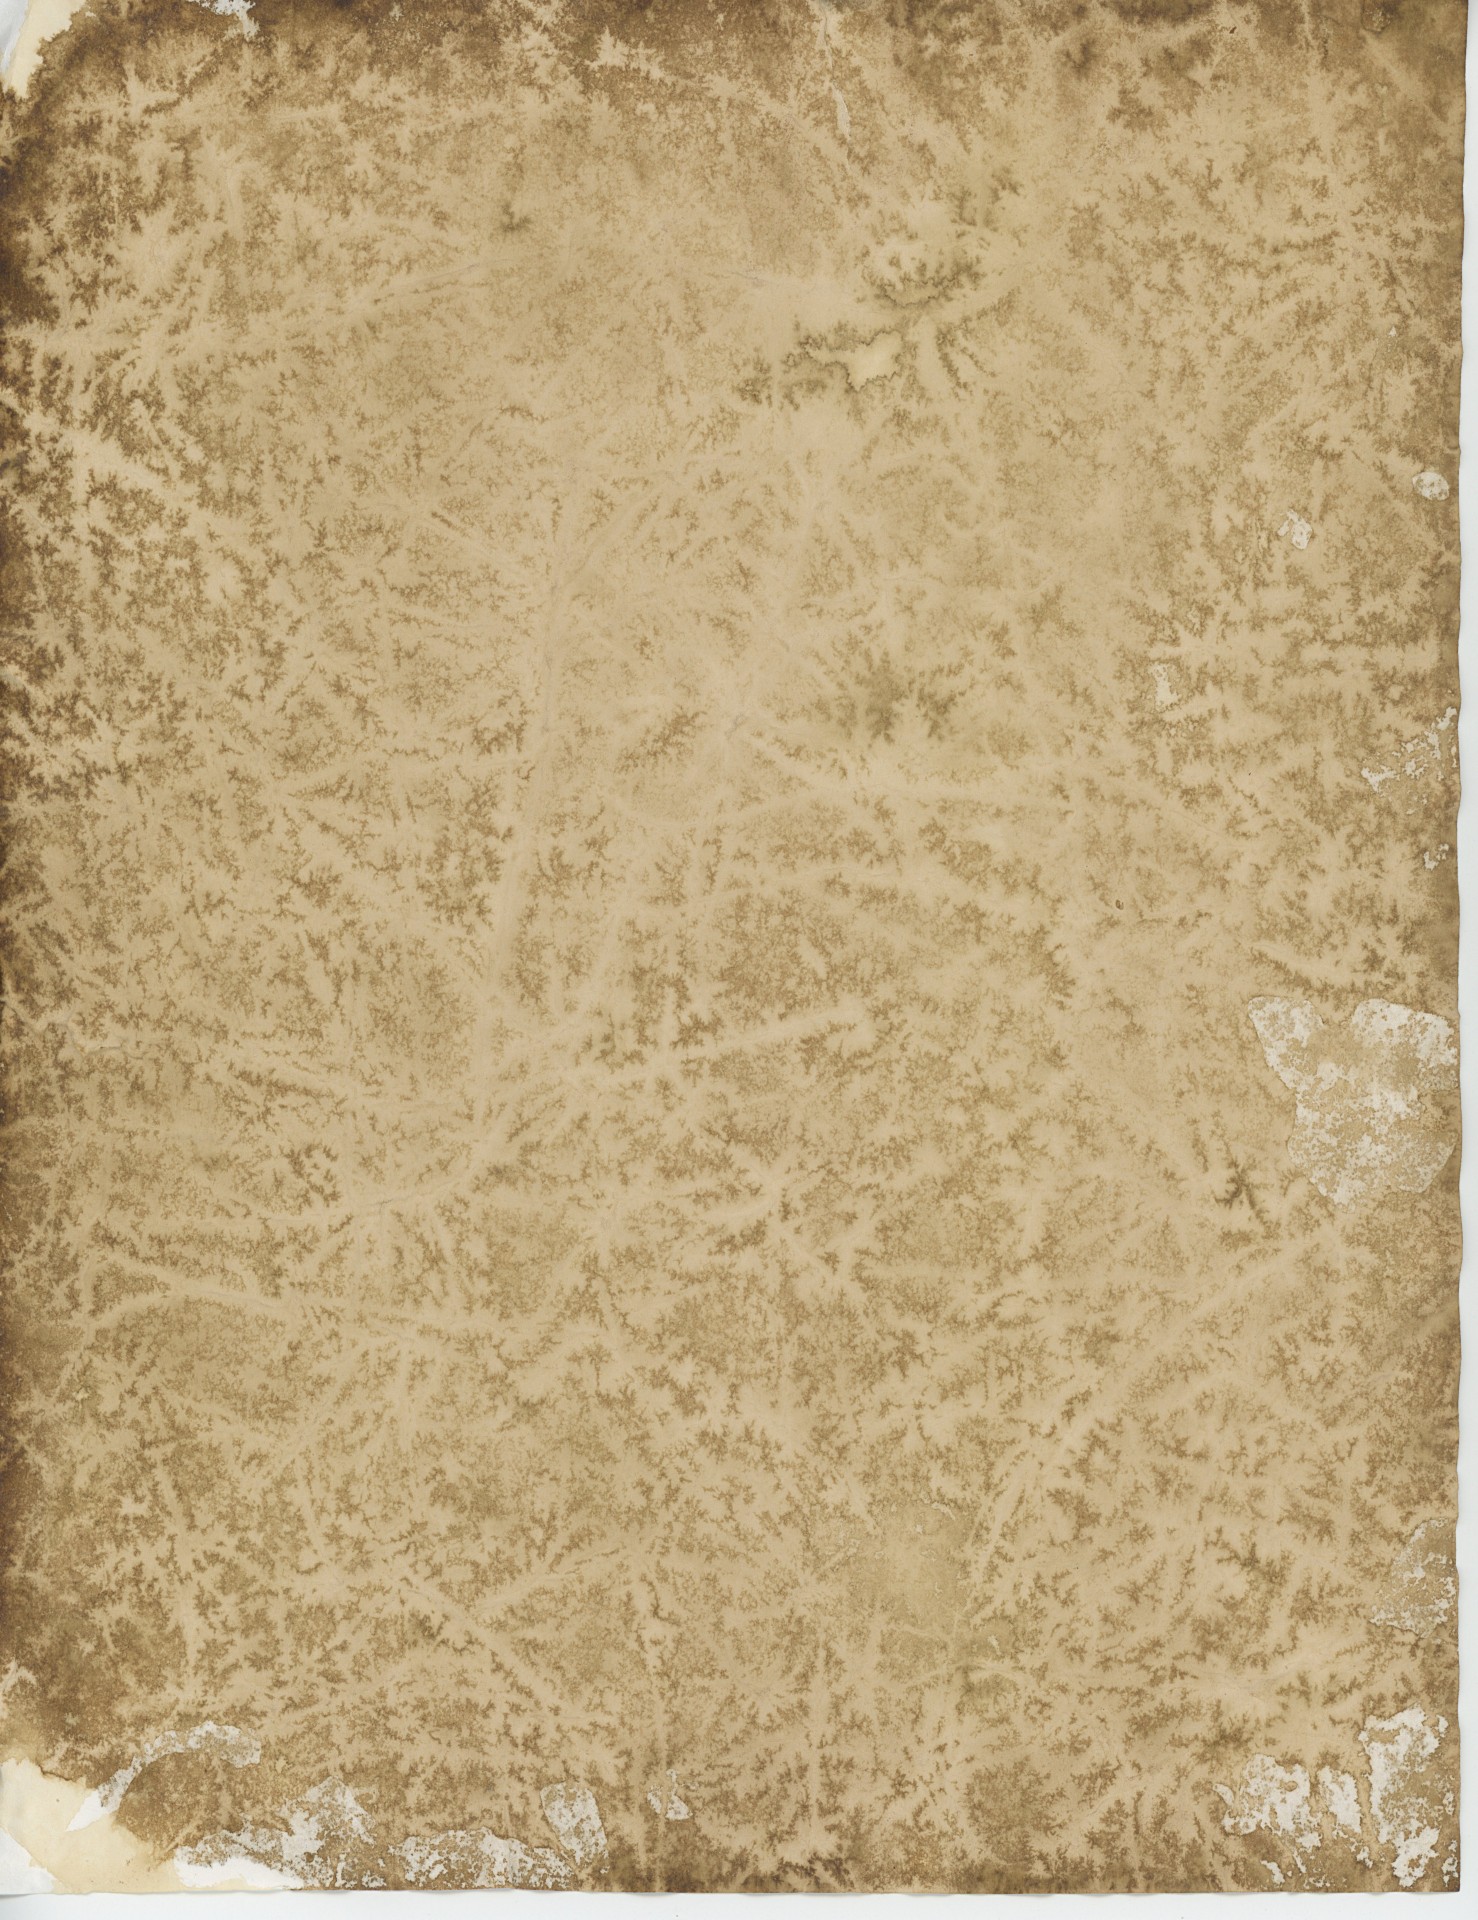 Weathered paper stock